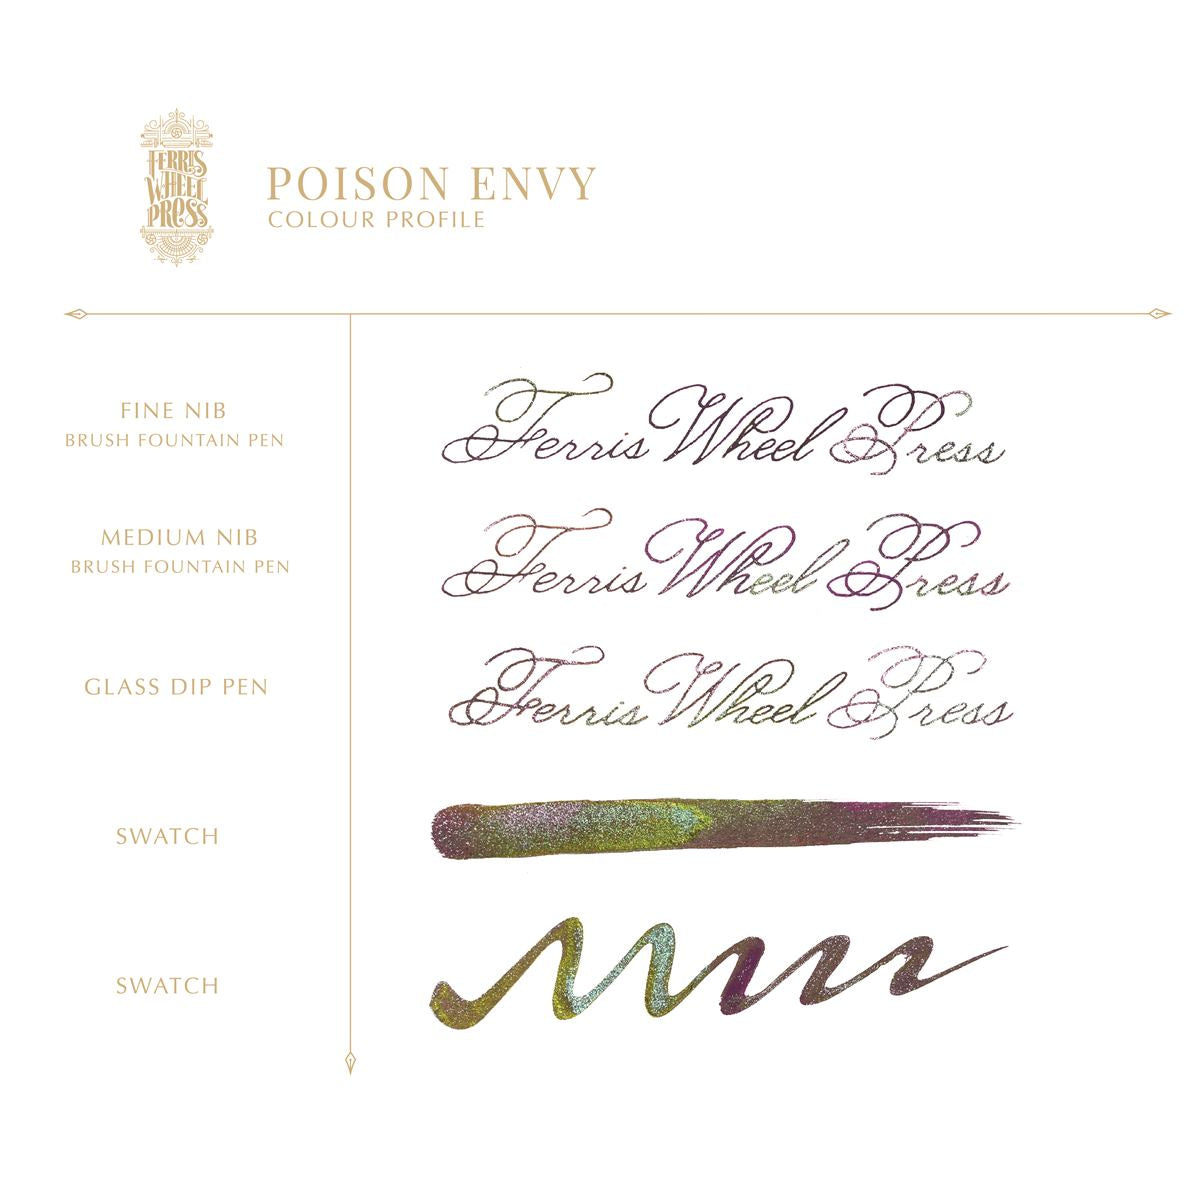 Ferris Wheel Press FerriTales Fountain Pen Ink | Once Upon a Time - Poison Envy